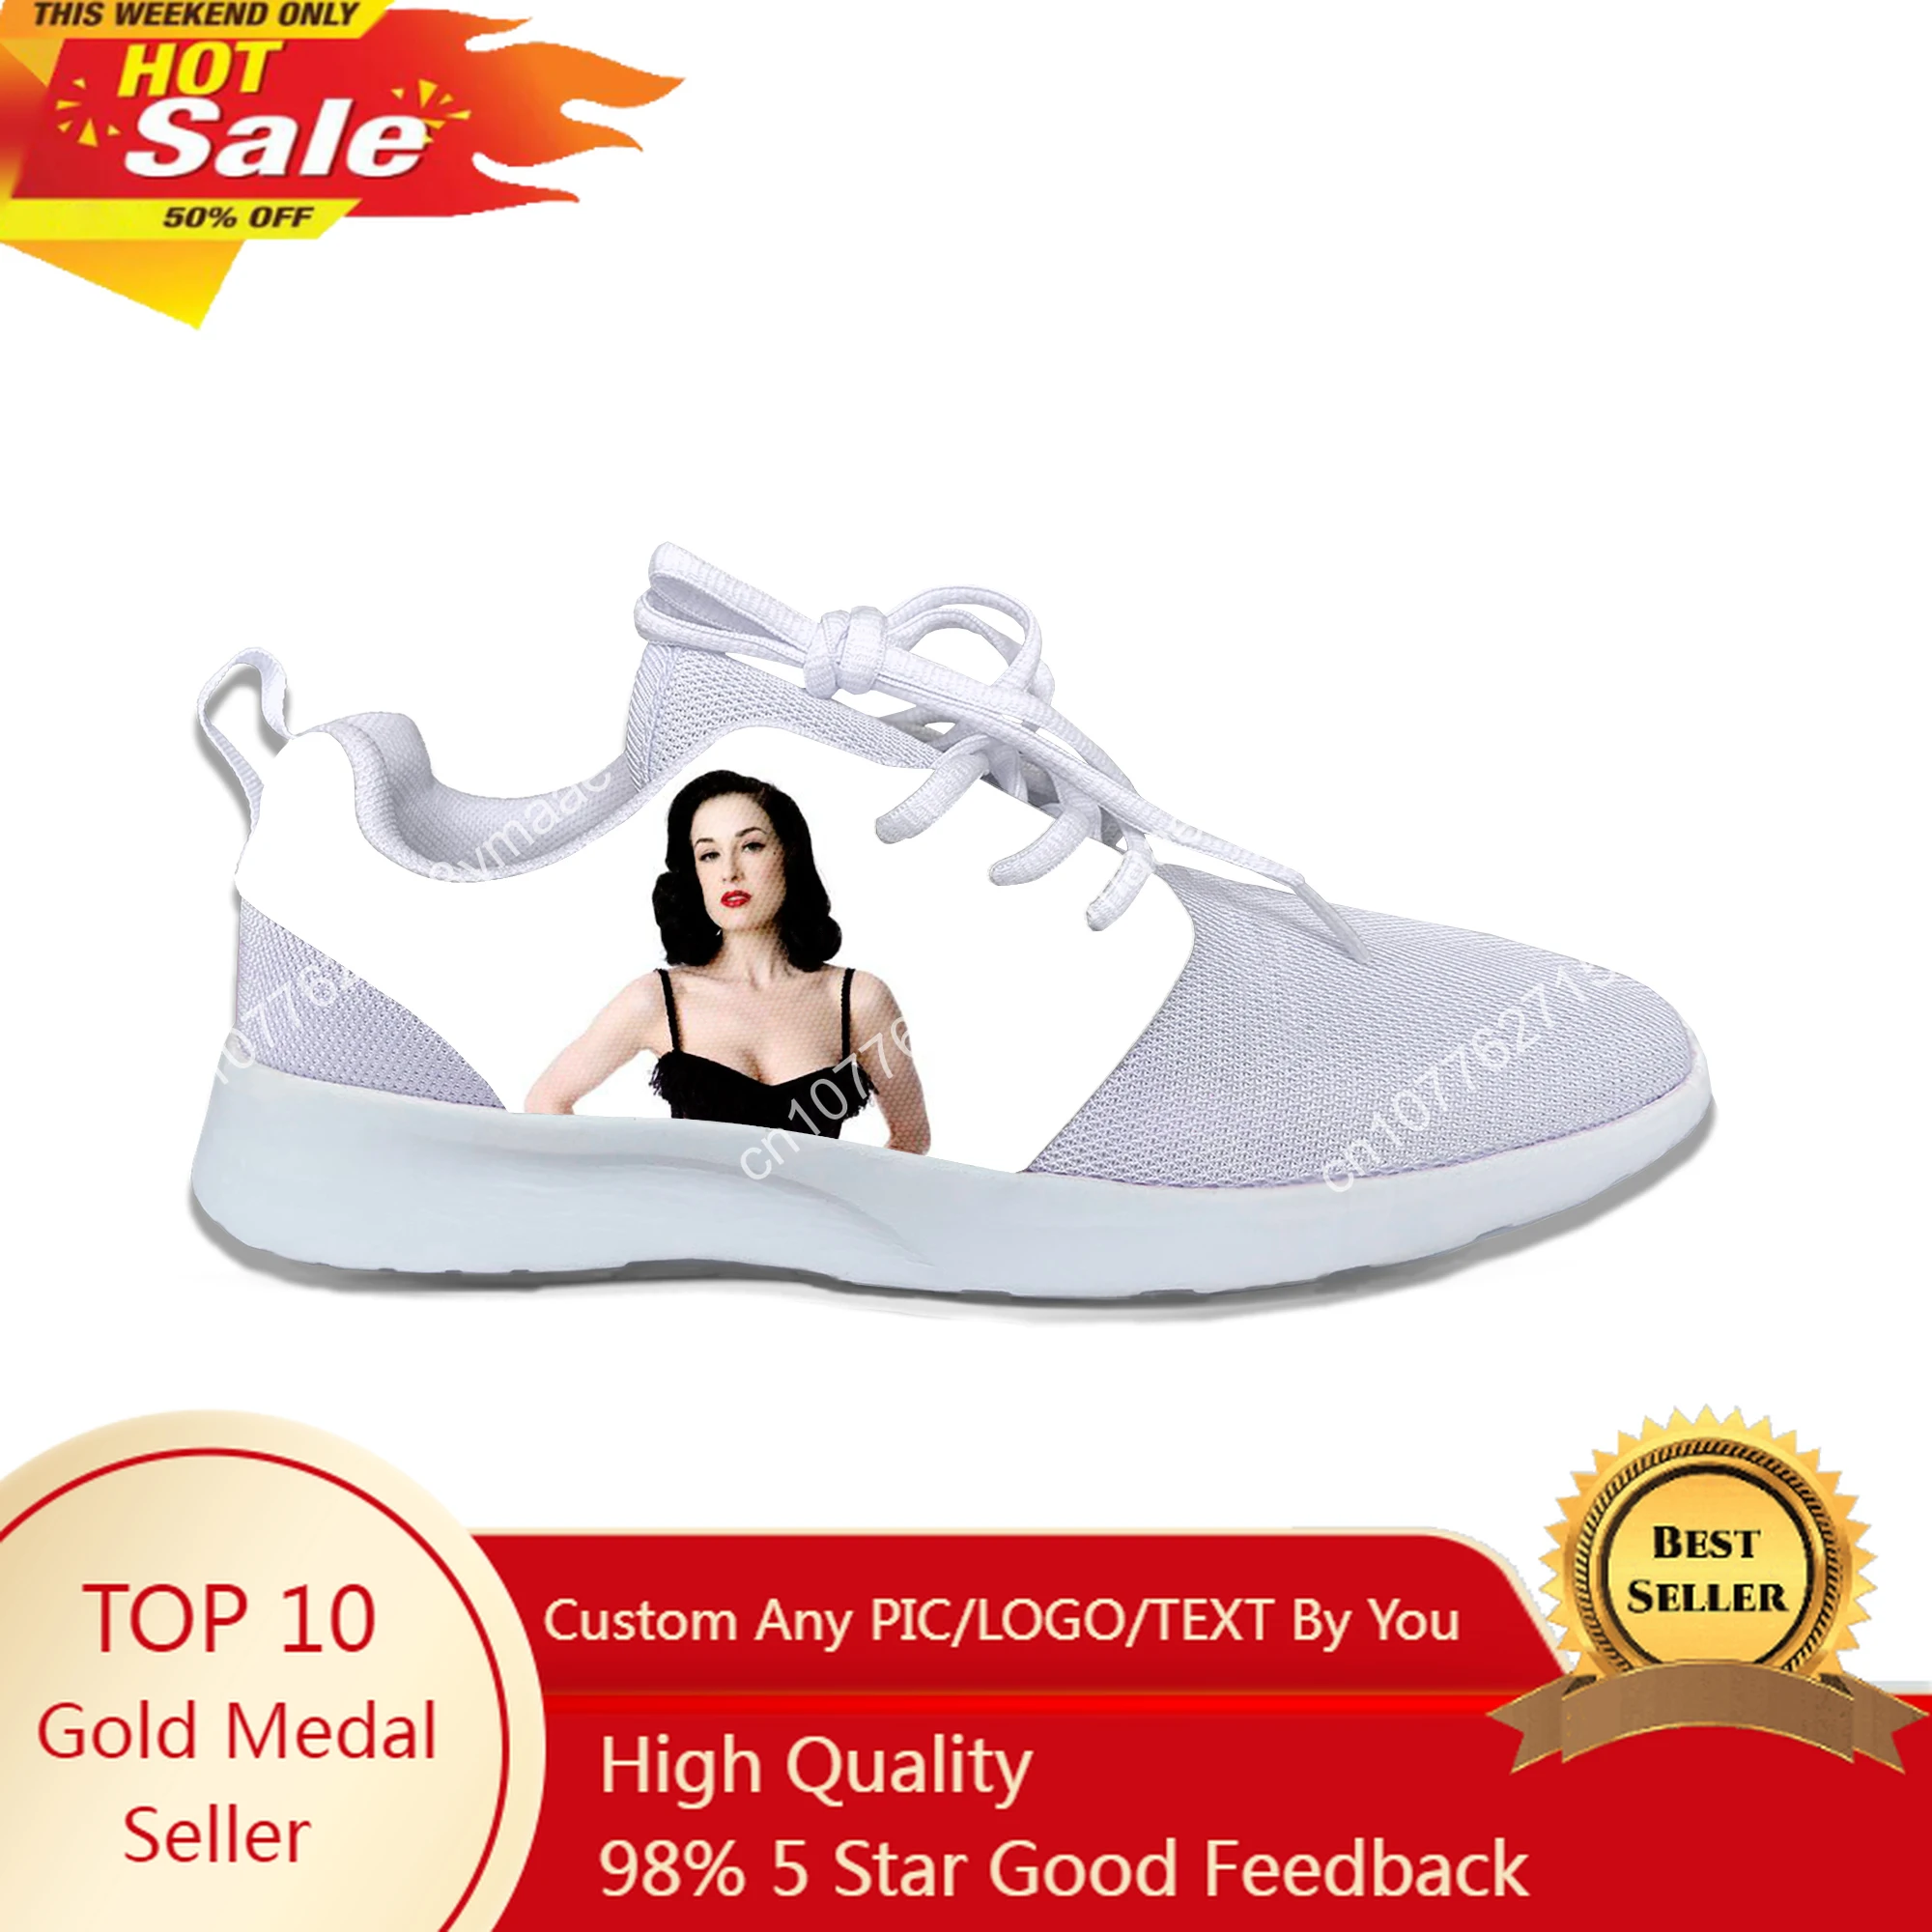 

Hot Cool Fashion New Summer High Quality Sneakers Casual Shoes Men Women Dita Von Teese Sports Shoes Mesh Latest Running Shoes